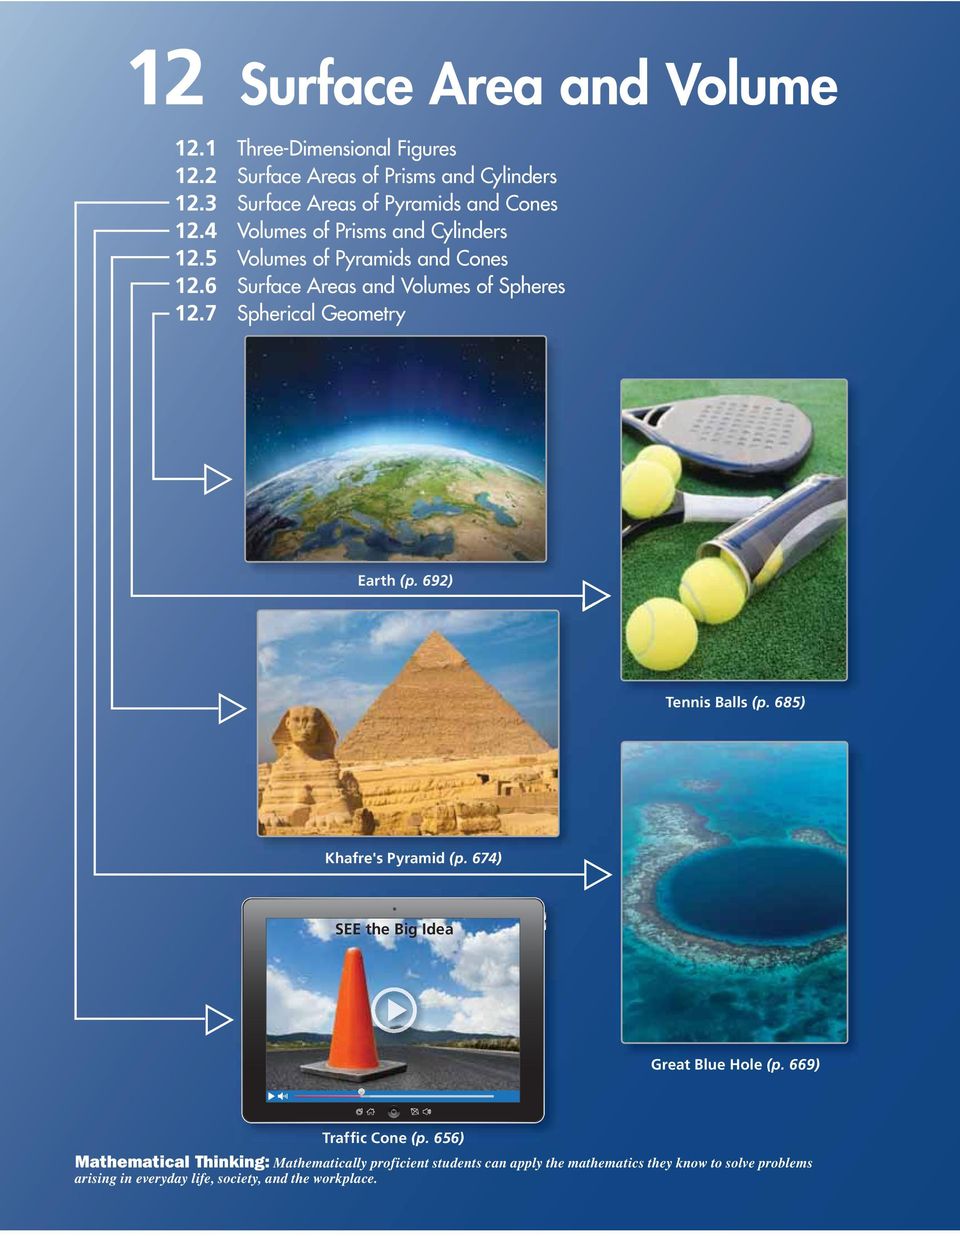 6 Surface Areas and Volumes of Spheres 12.7 Spherical Geometry Earth (p. 692) Tennis alls (p. 685) Khafre's Pyramid (p.